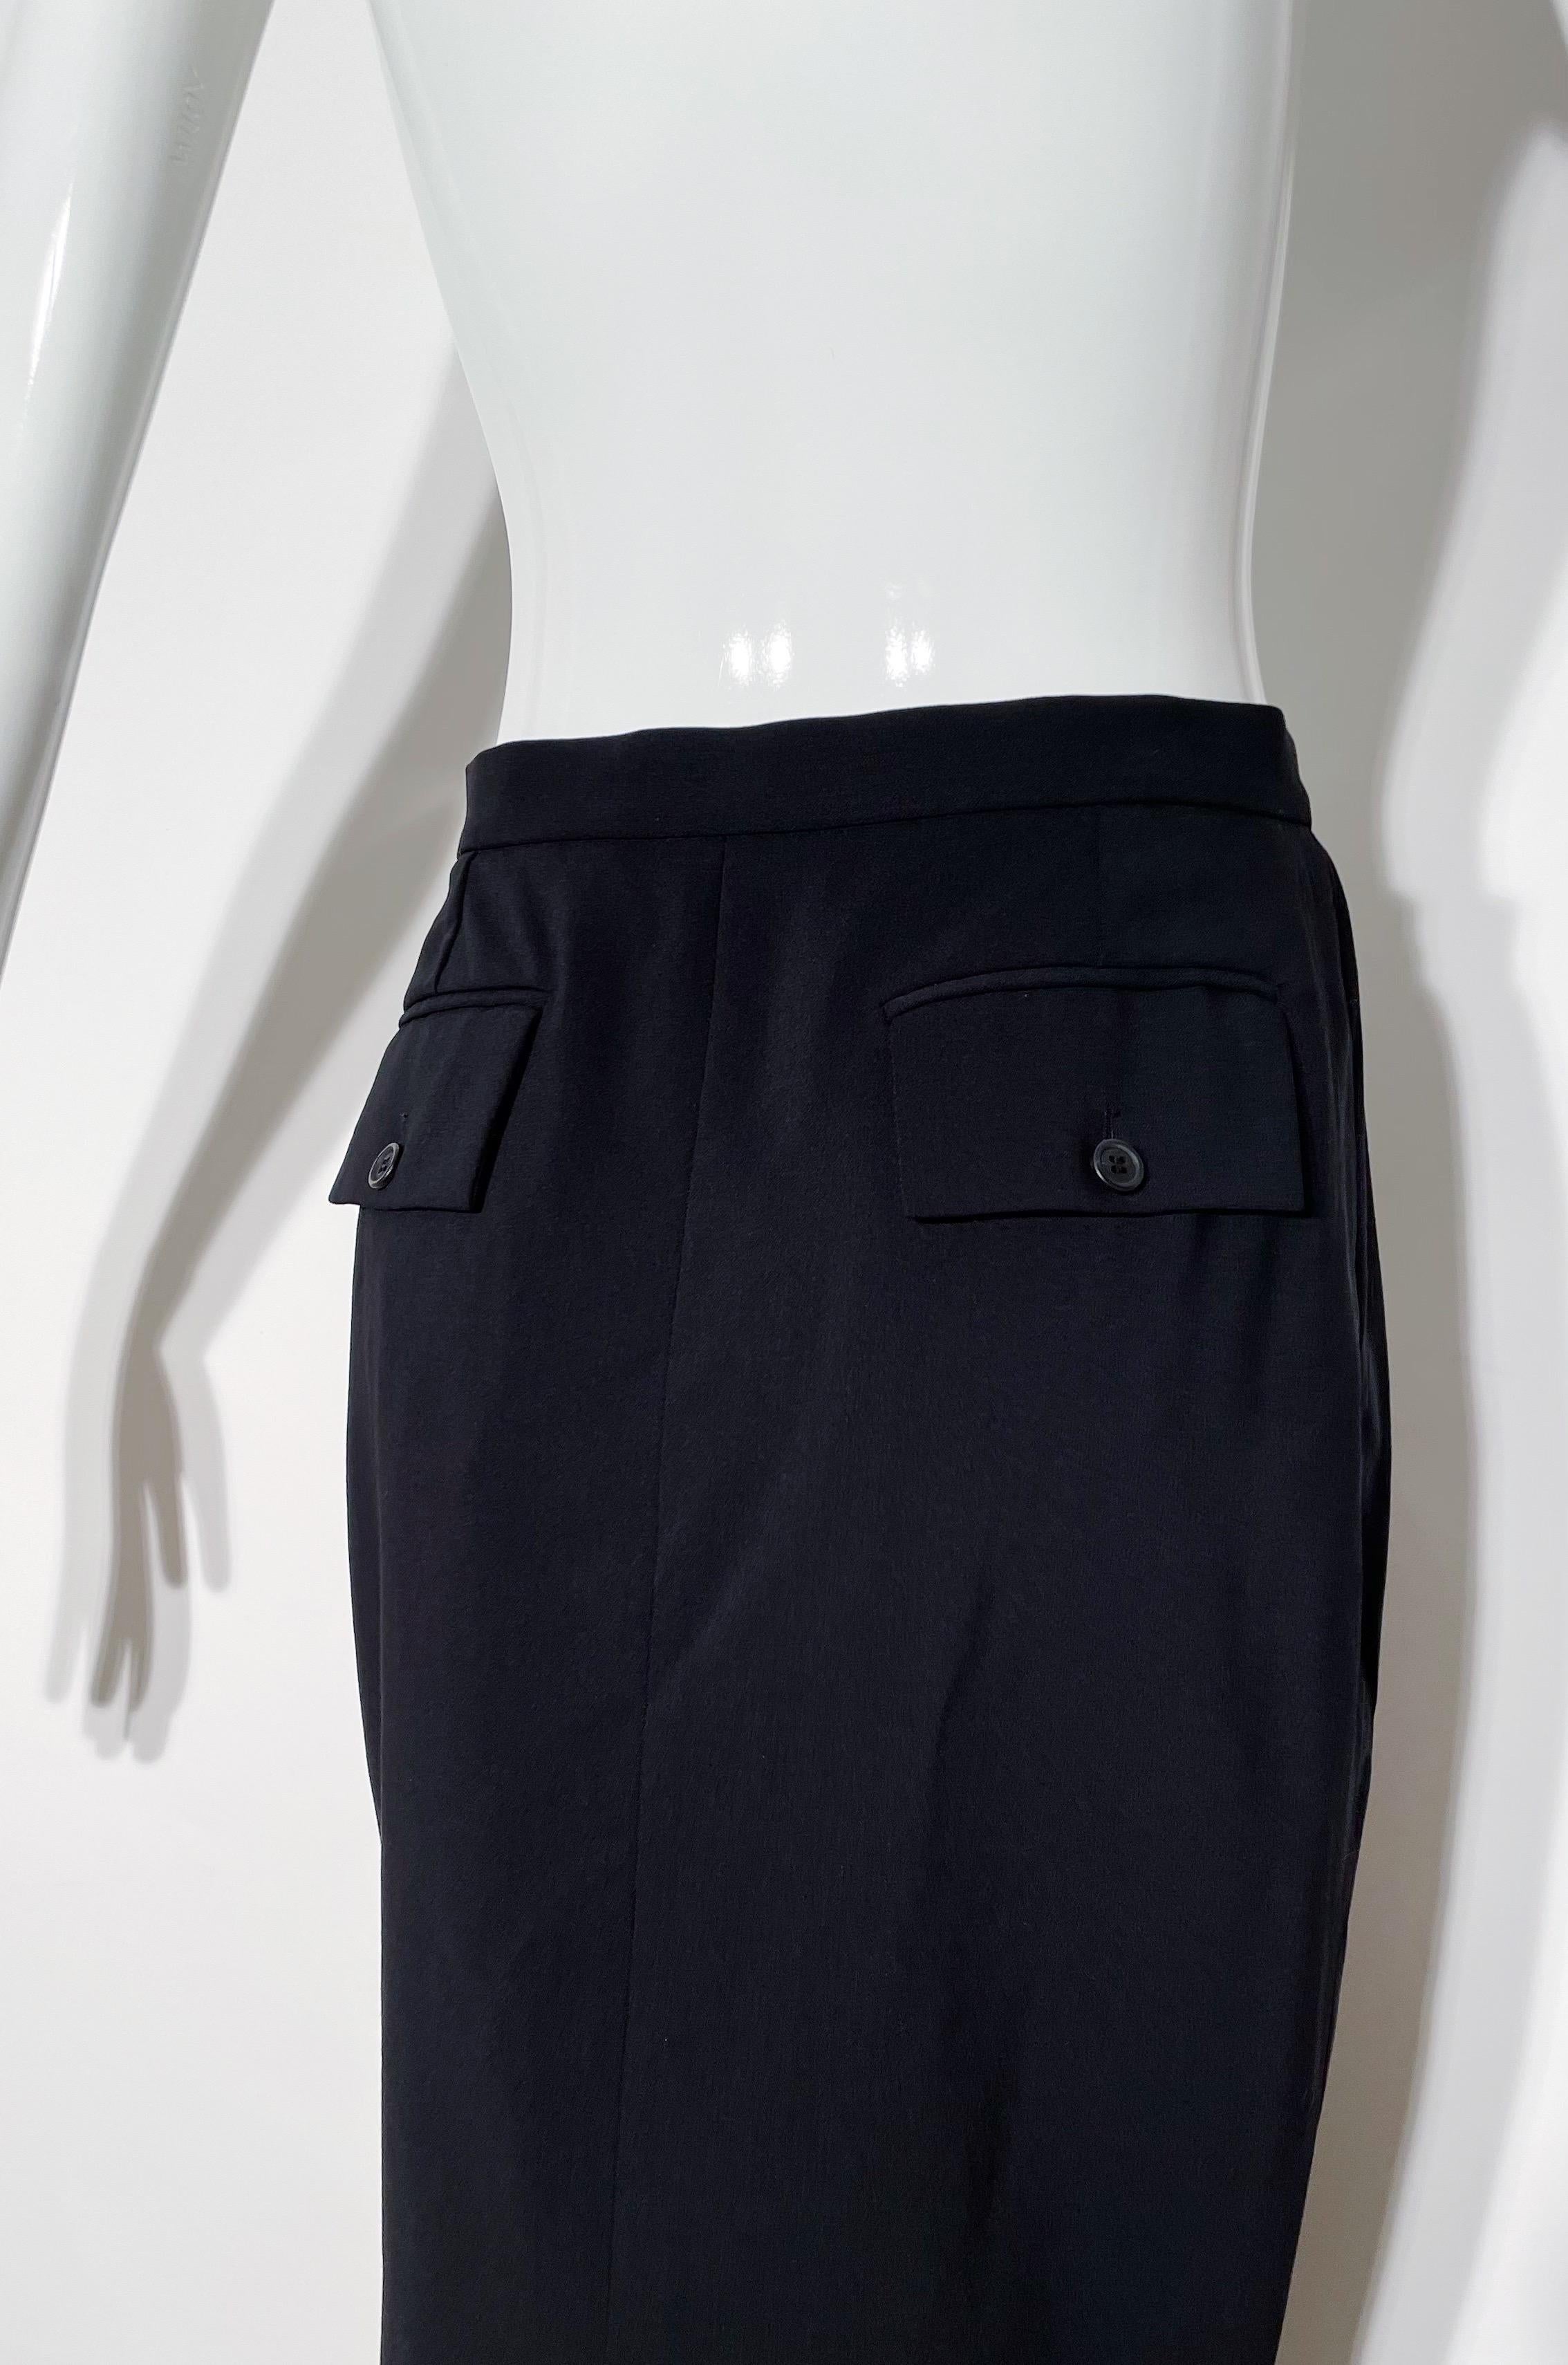 Dolce & Gabbana Pencil Skirt In Excellent Condition For Sale In Waterford, MI